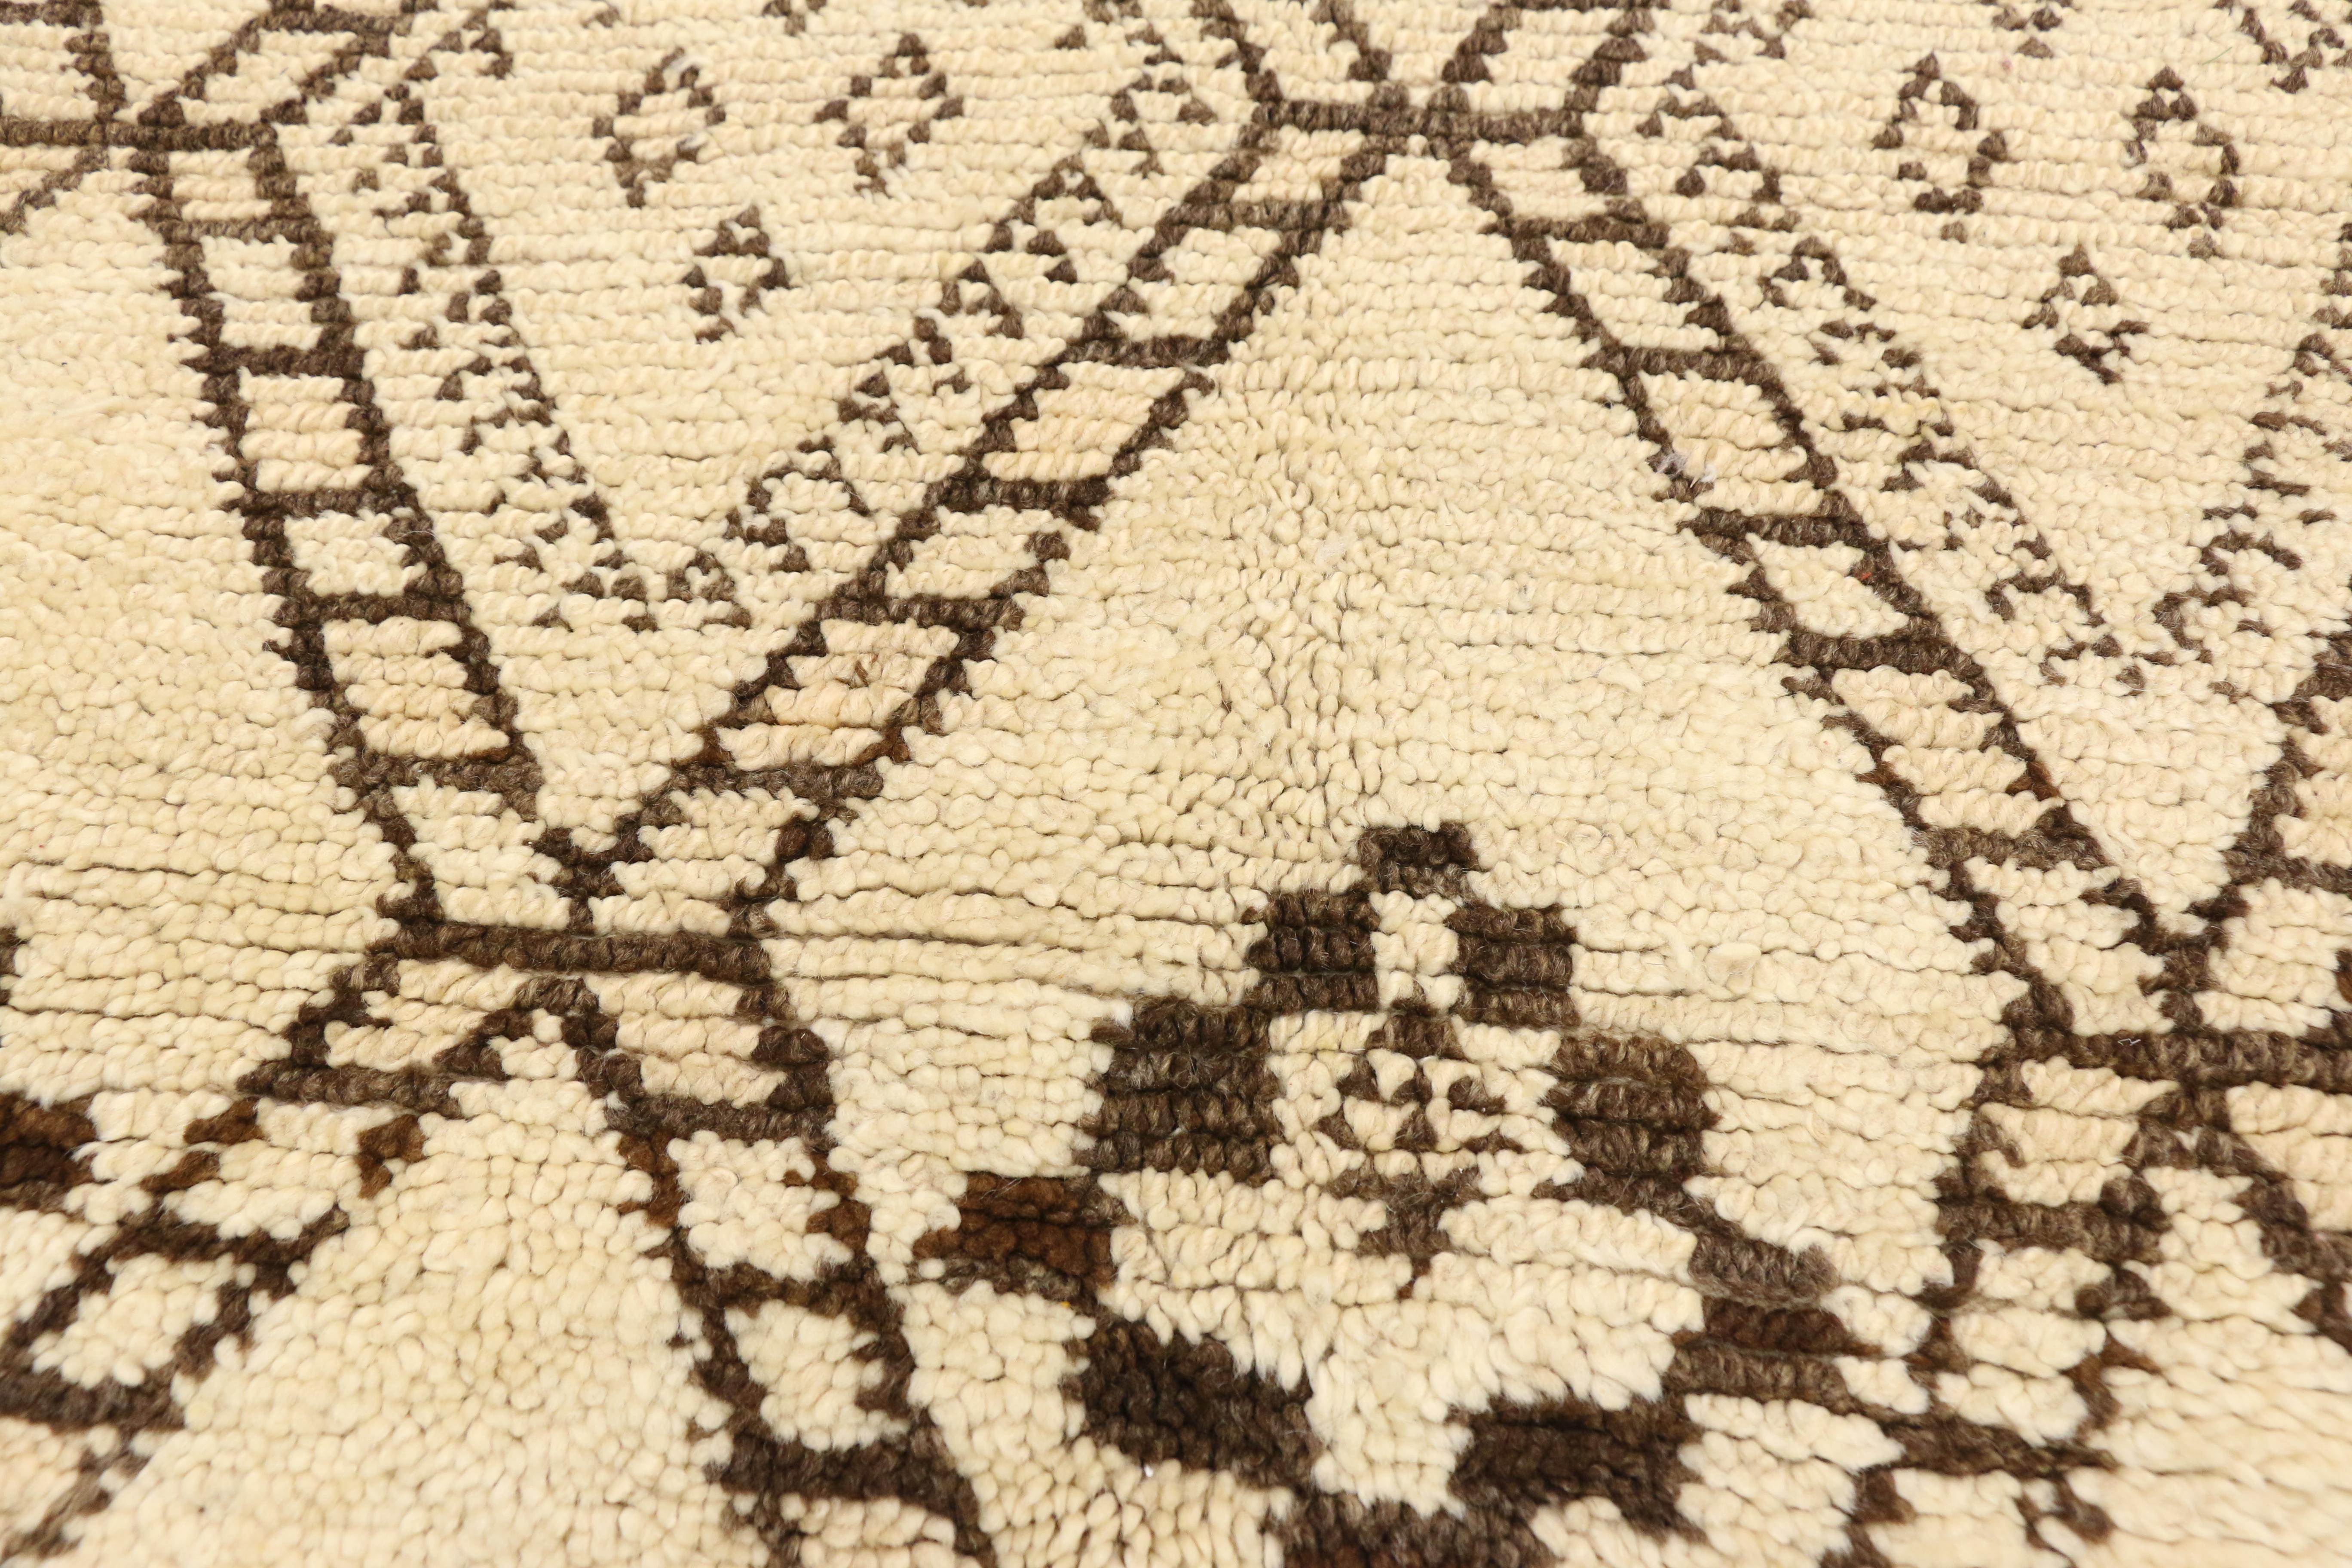 Hand-Knotted Beni Ourain Moroccan Rug with Tribal Style, Beni Ourain Rug